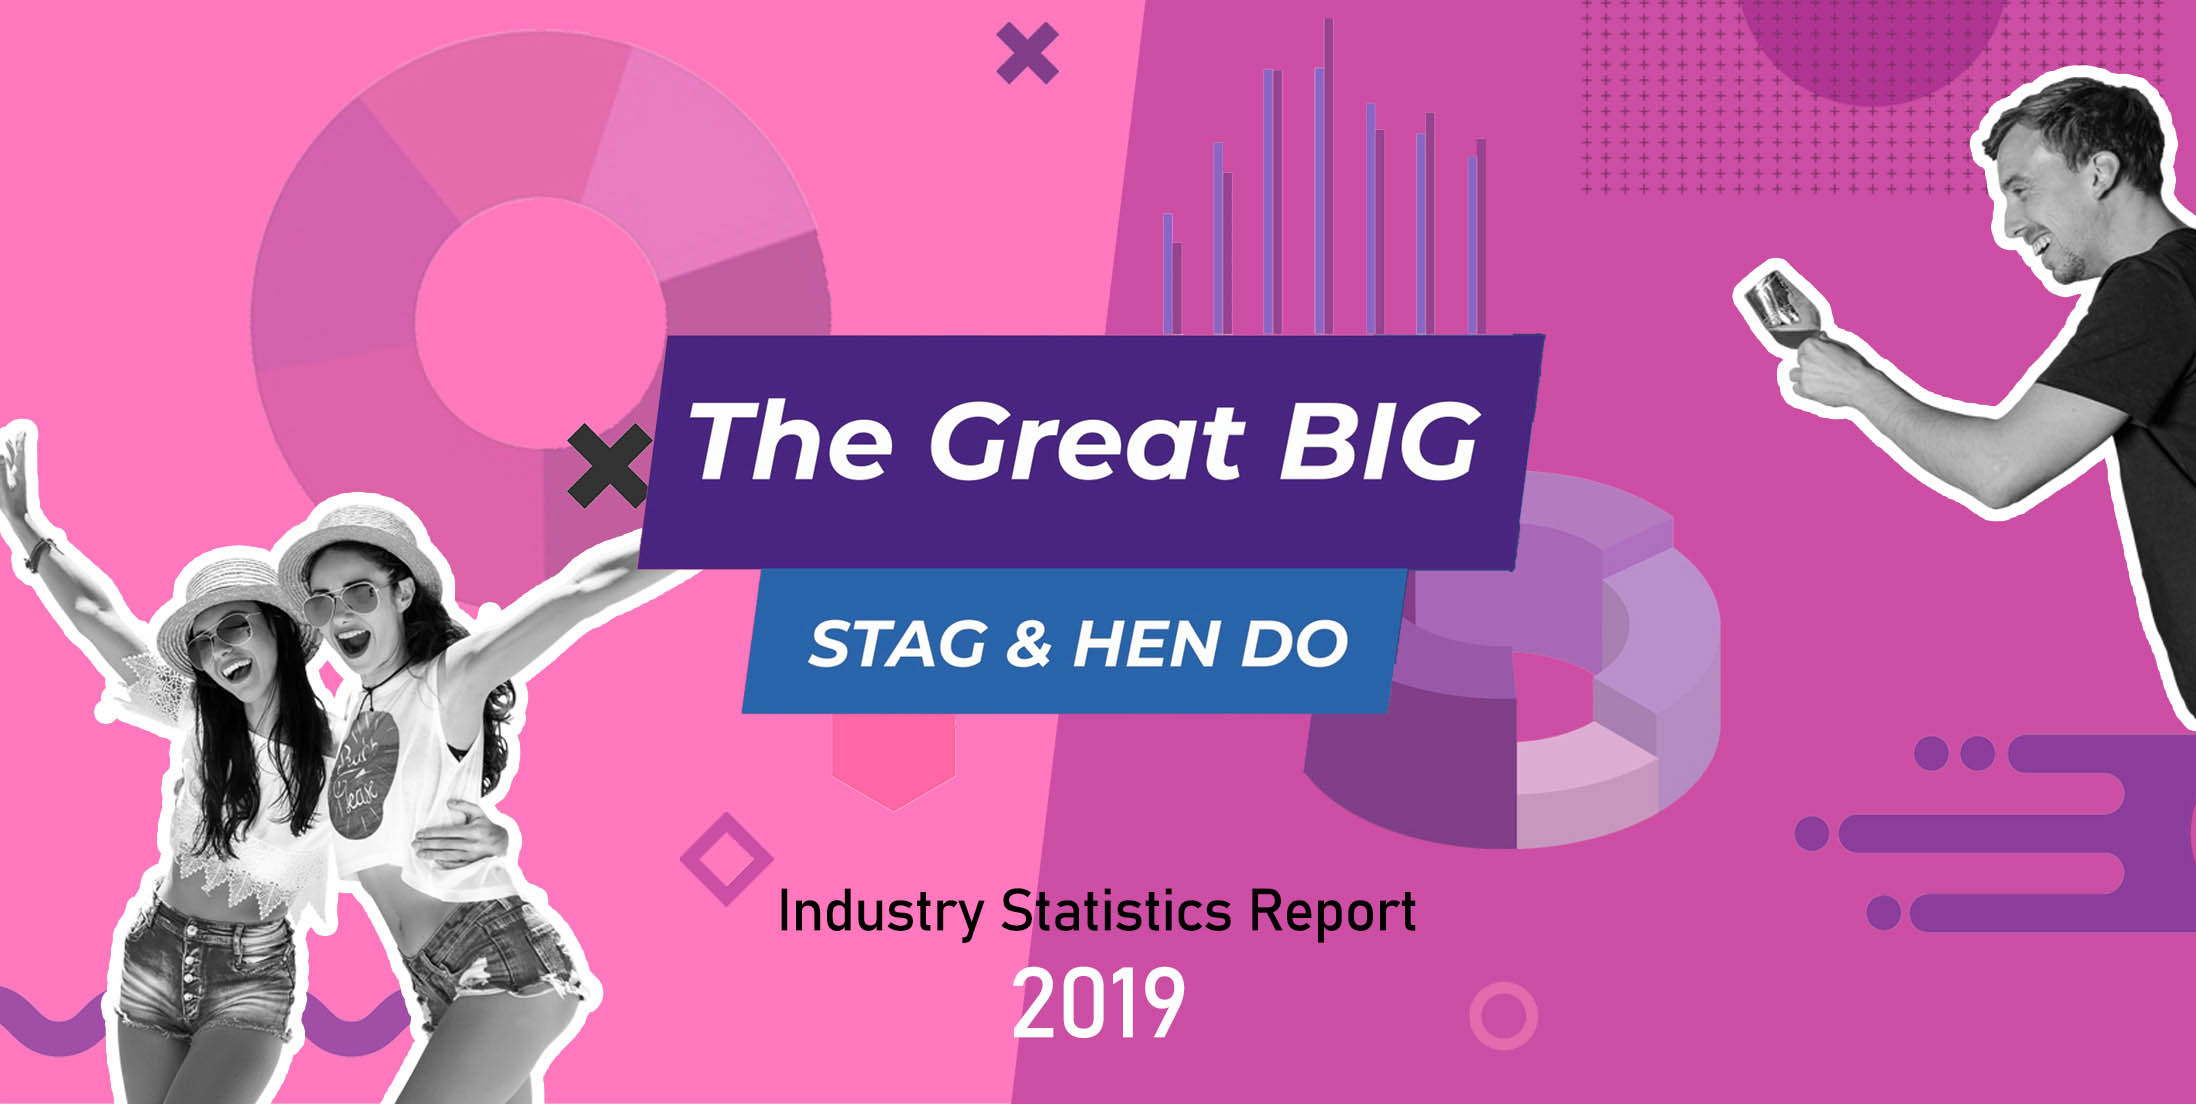 The Great Big Stag & Hen Do Trends Analysis 2019